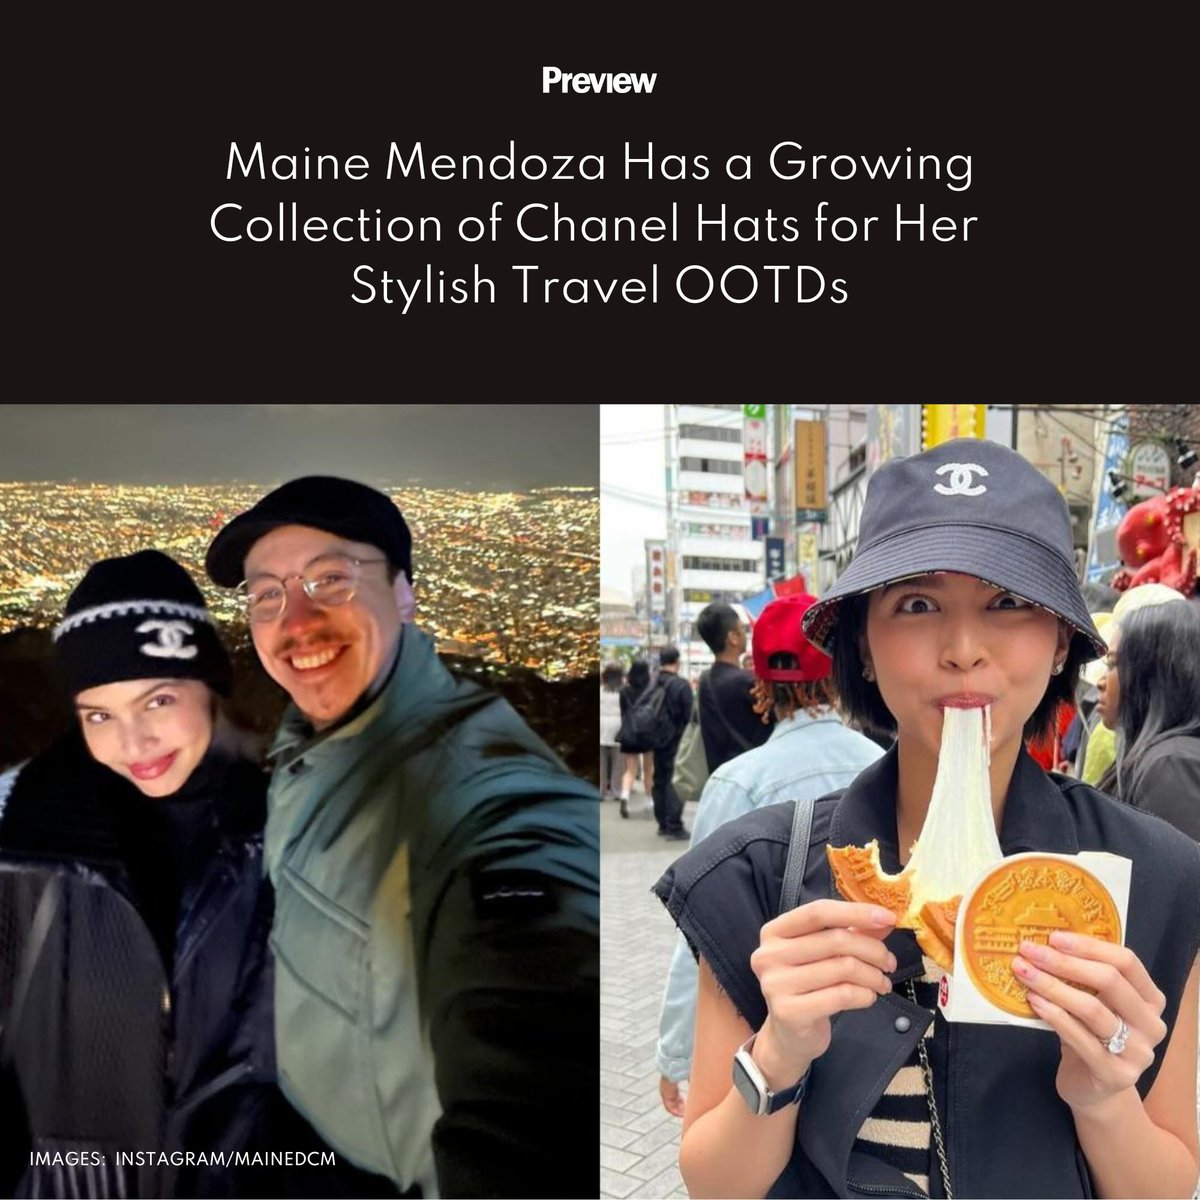 It's no secret that #MaineMendoza is a certified #Chanel girl. On days she wants to let her tresses take a break, she reaches for a stylish hat that, of course, has some double C's on them. Check out her growing collection here: bit.ly/4dojKak